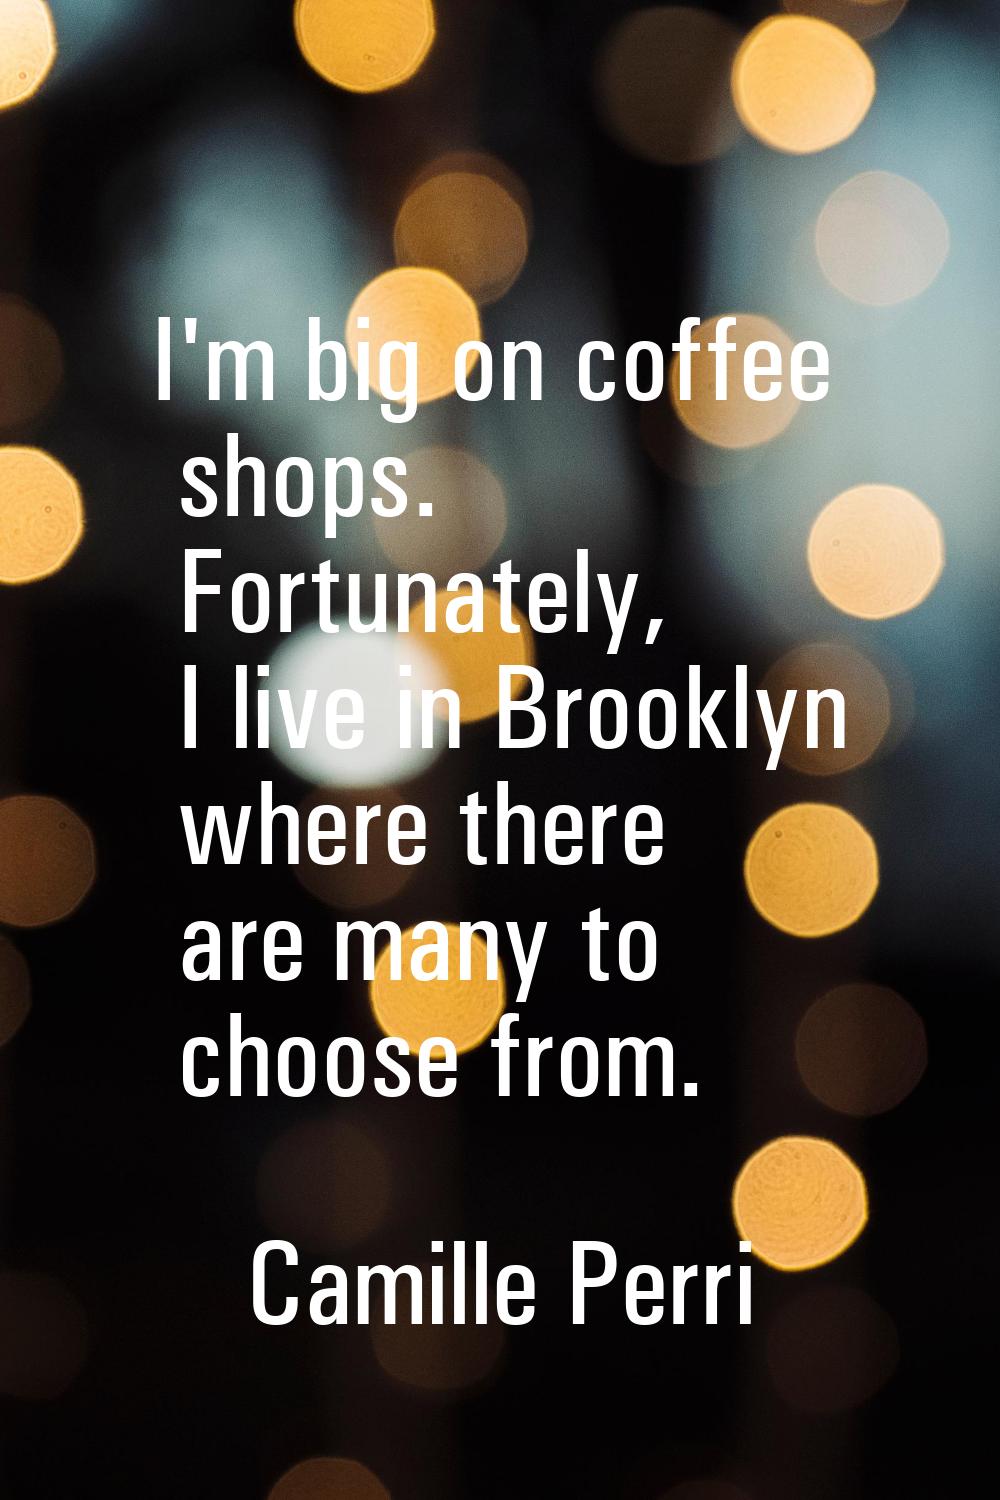 I'm big on coffee shops. Fortunately, I live in Brooklyn where there are many to choose from.